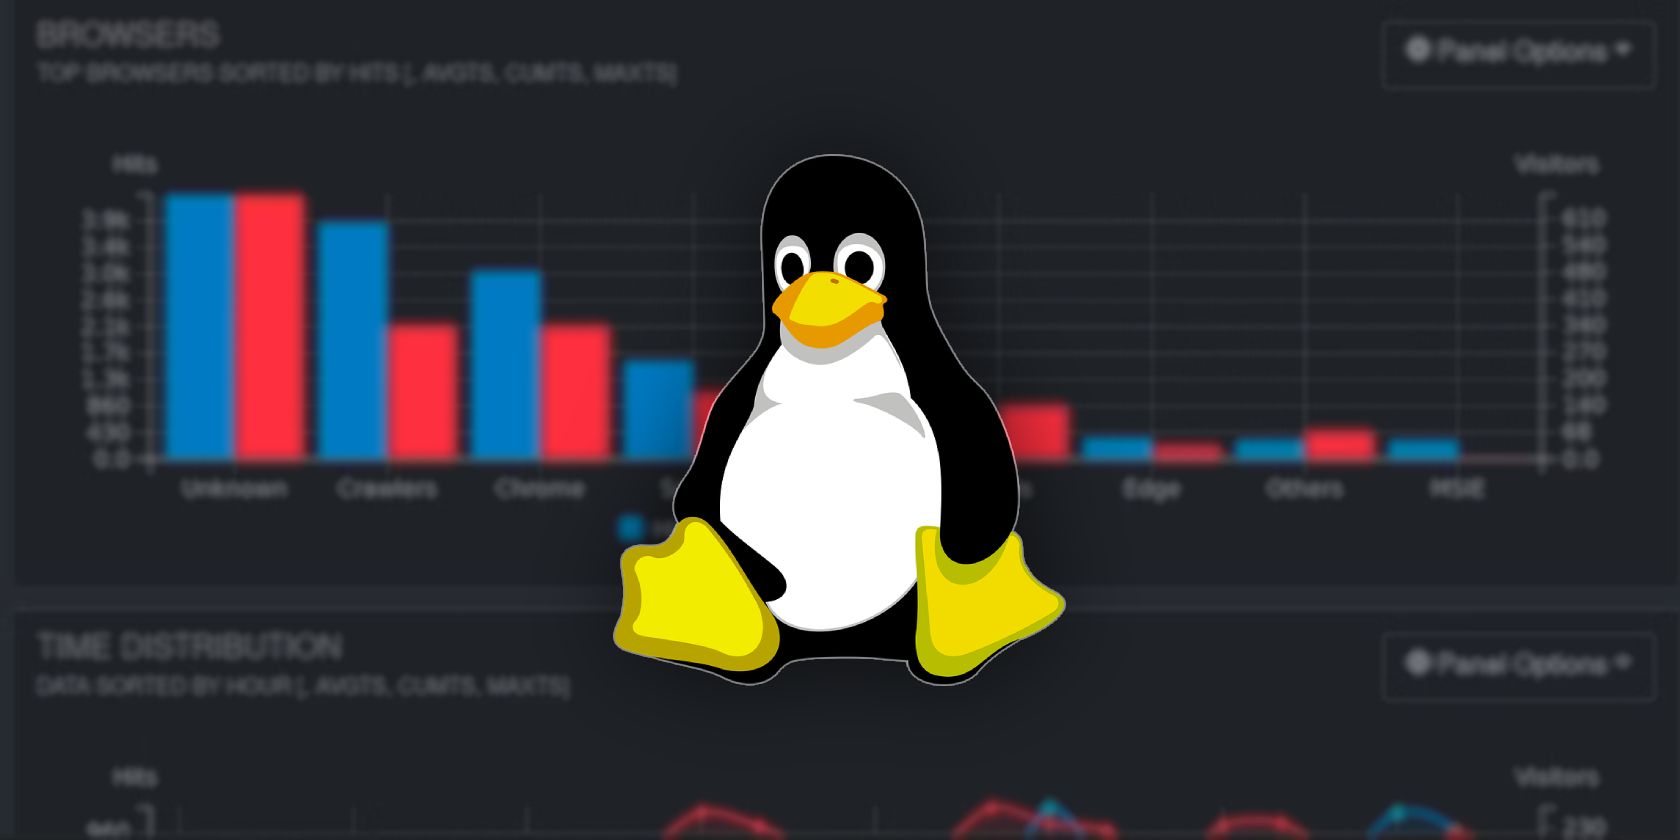 goaccess website analytics dashboard with linux tux